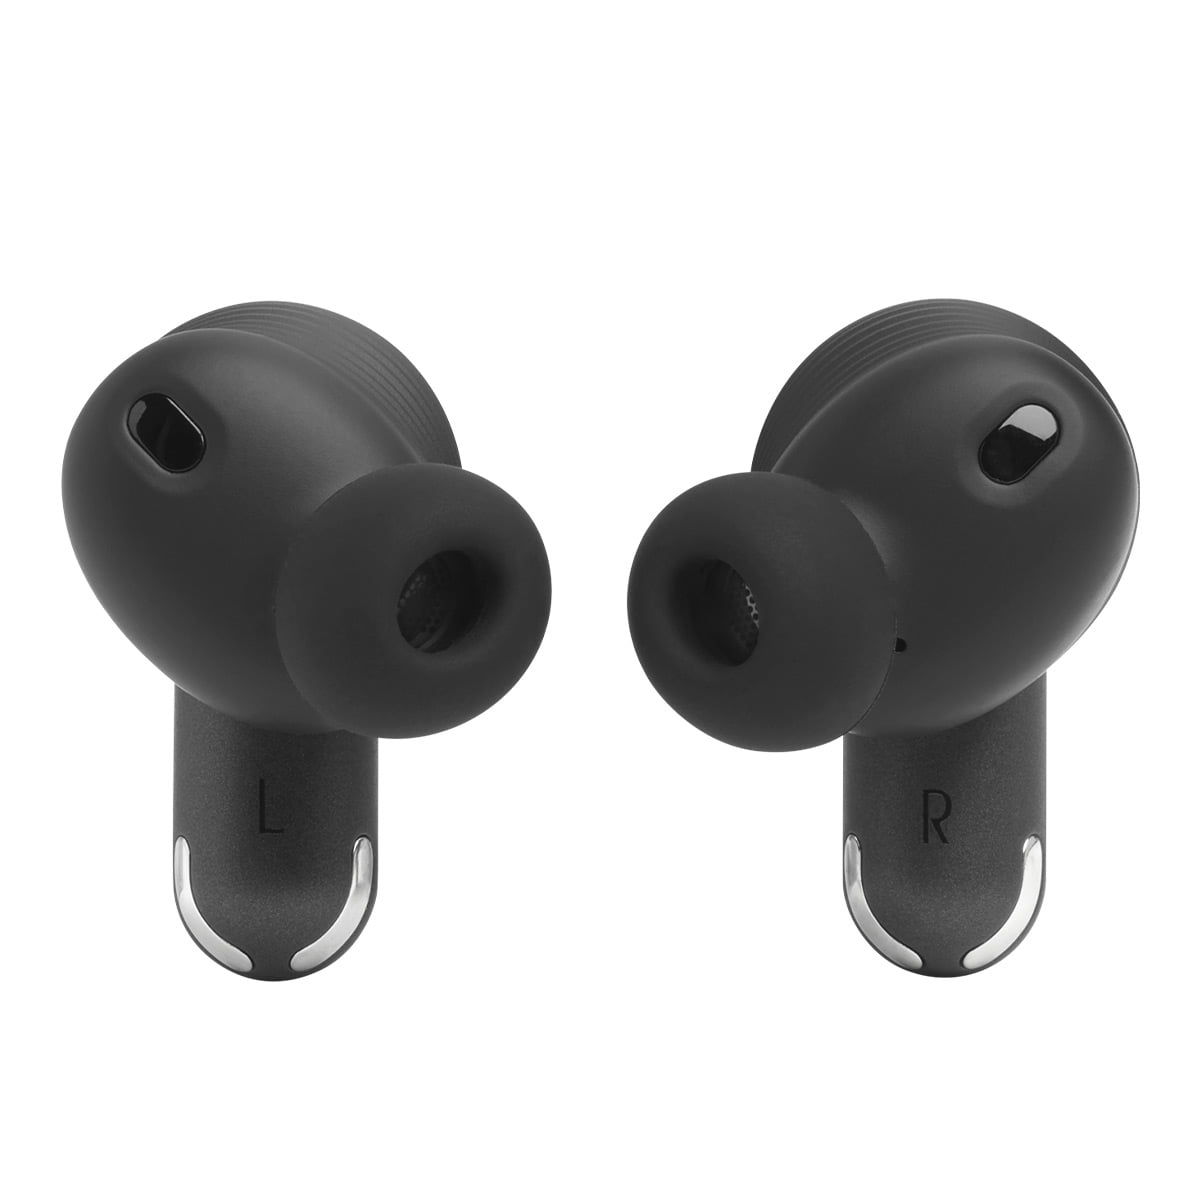 Pro Cancelling Wireless True JBL Noise Smart Case Earbuds Tour 2 with (Black)